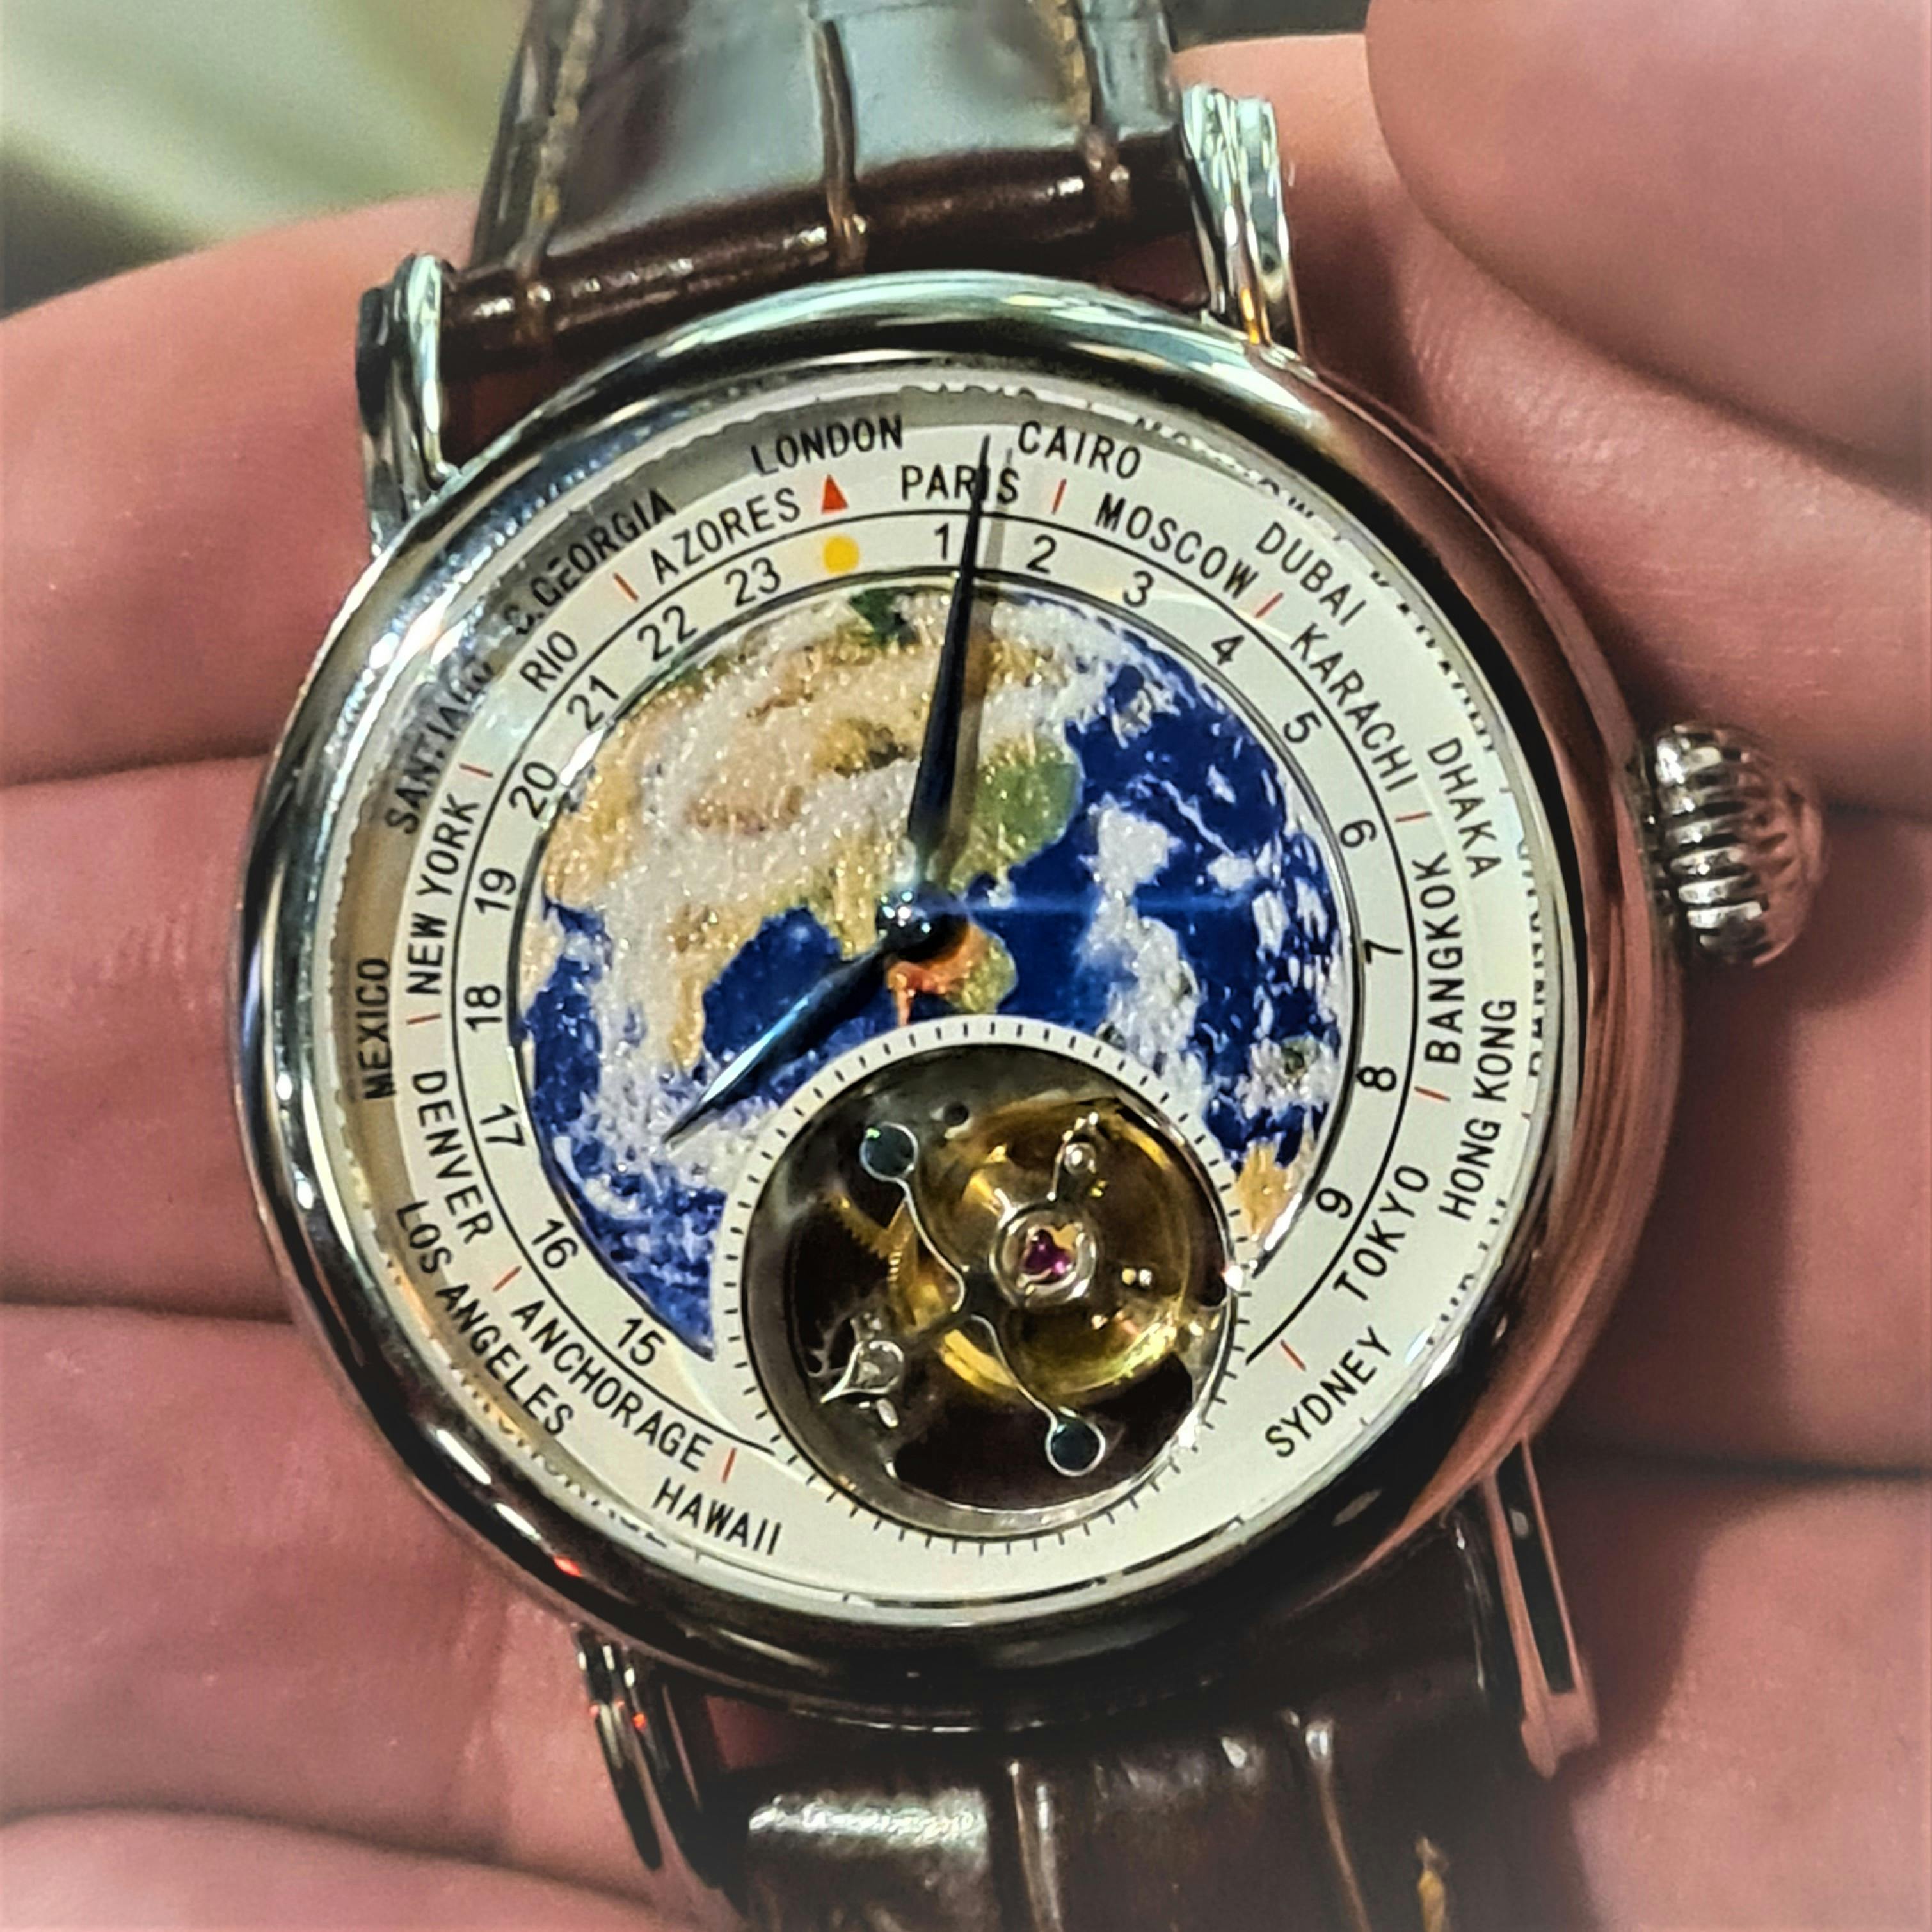 A Seagull Worldtime Tourbillon, which includes a Tourbillon mechanism designed to improve the watch's accuracy.